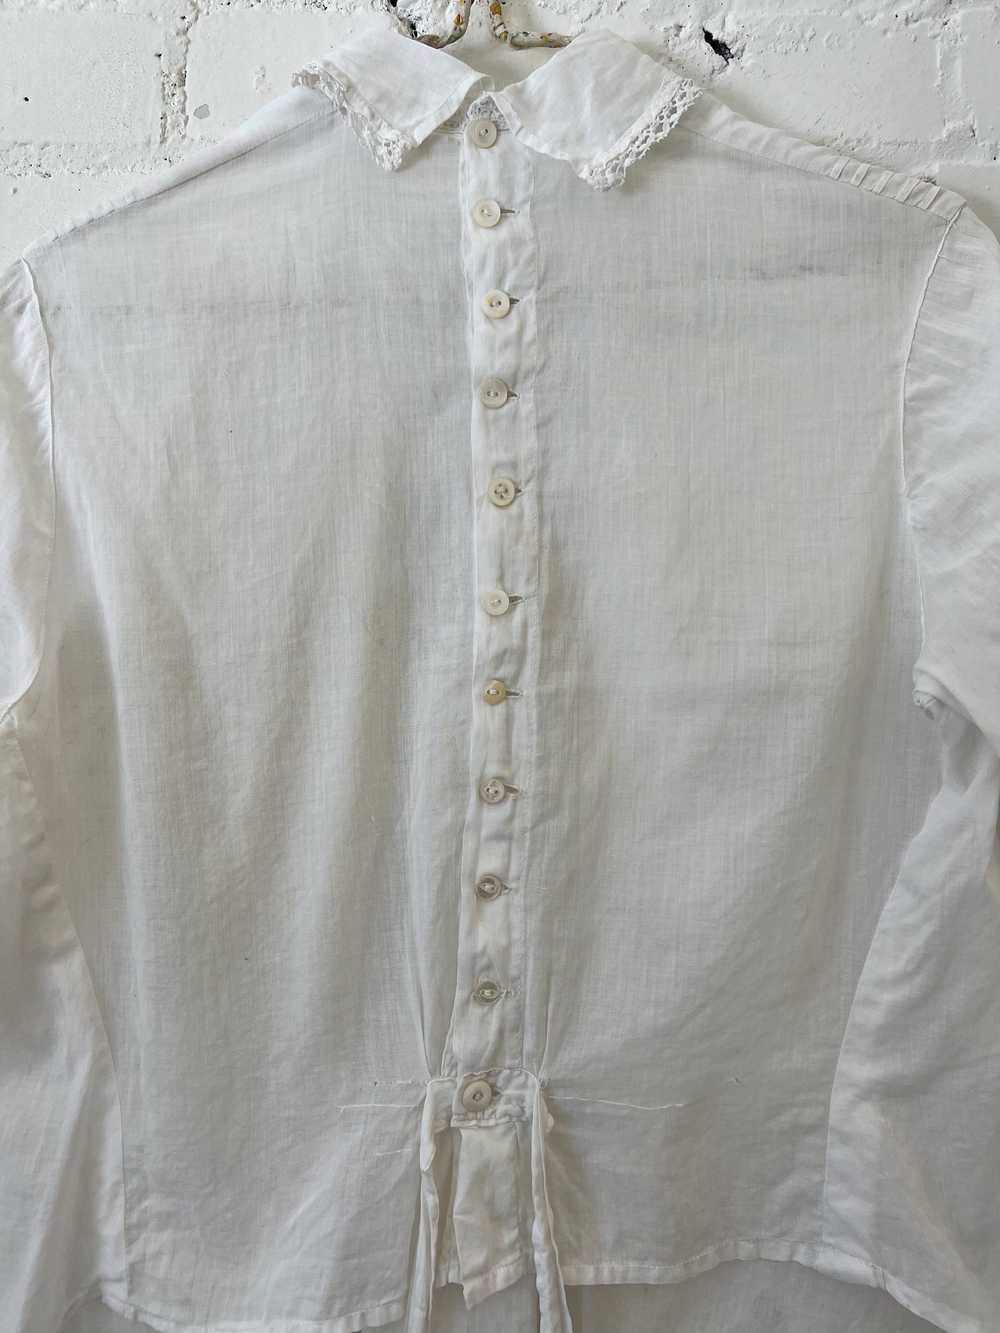 Antique Cotton Blouse w/Floral Embroidery, Small - image 5